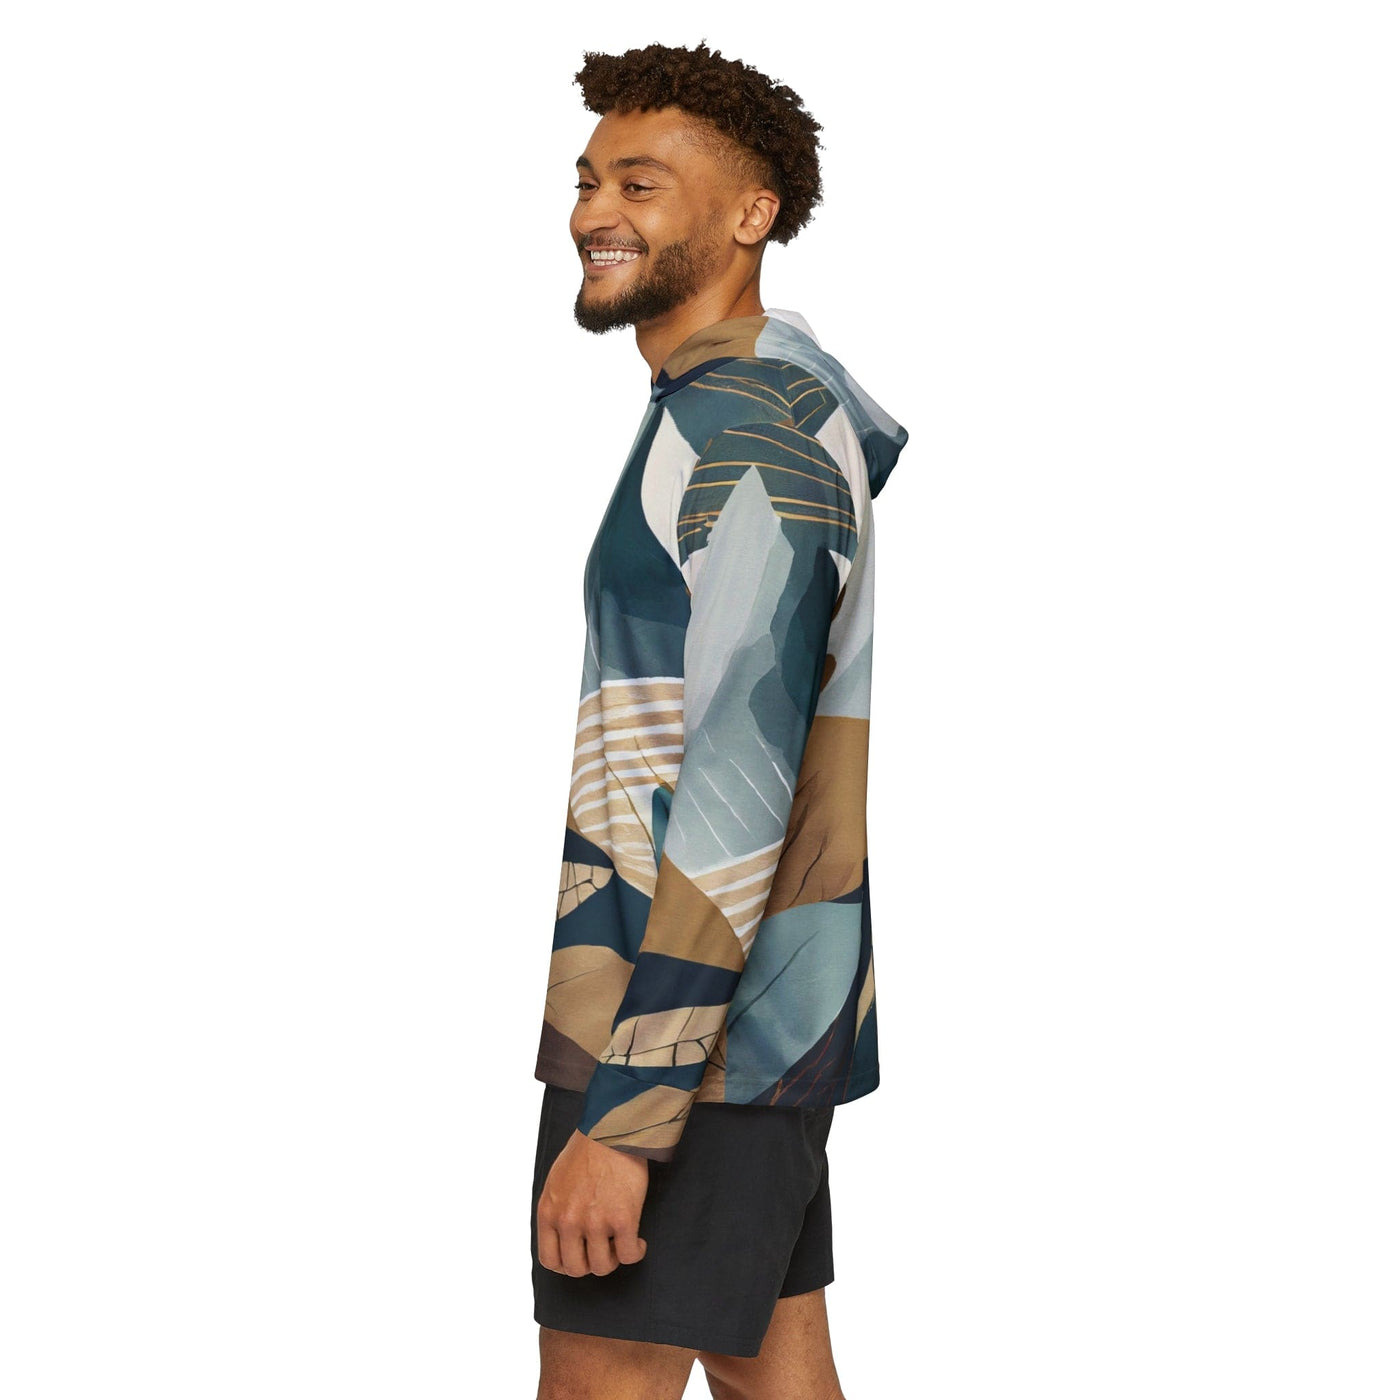 Mens Sports Graphic Hoodie Boho Style Print 3698 - All Over Prints